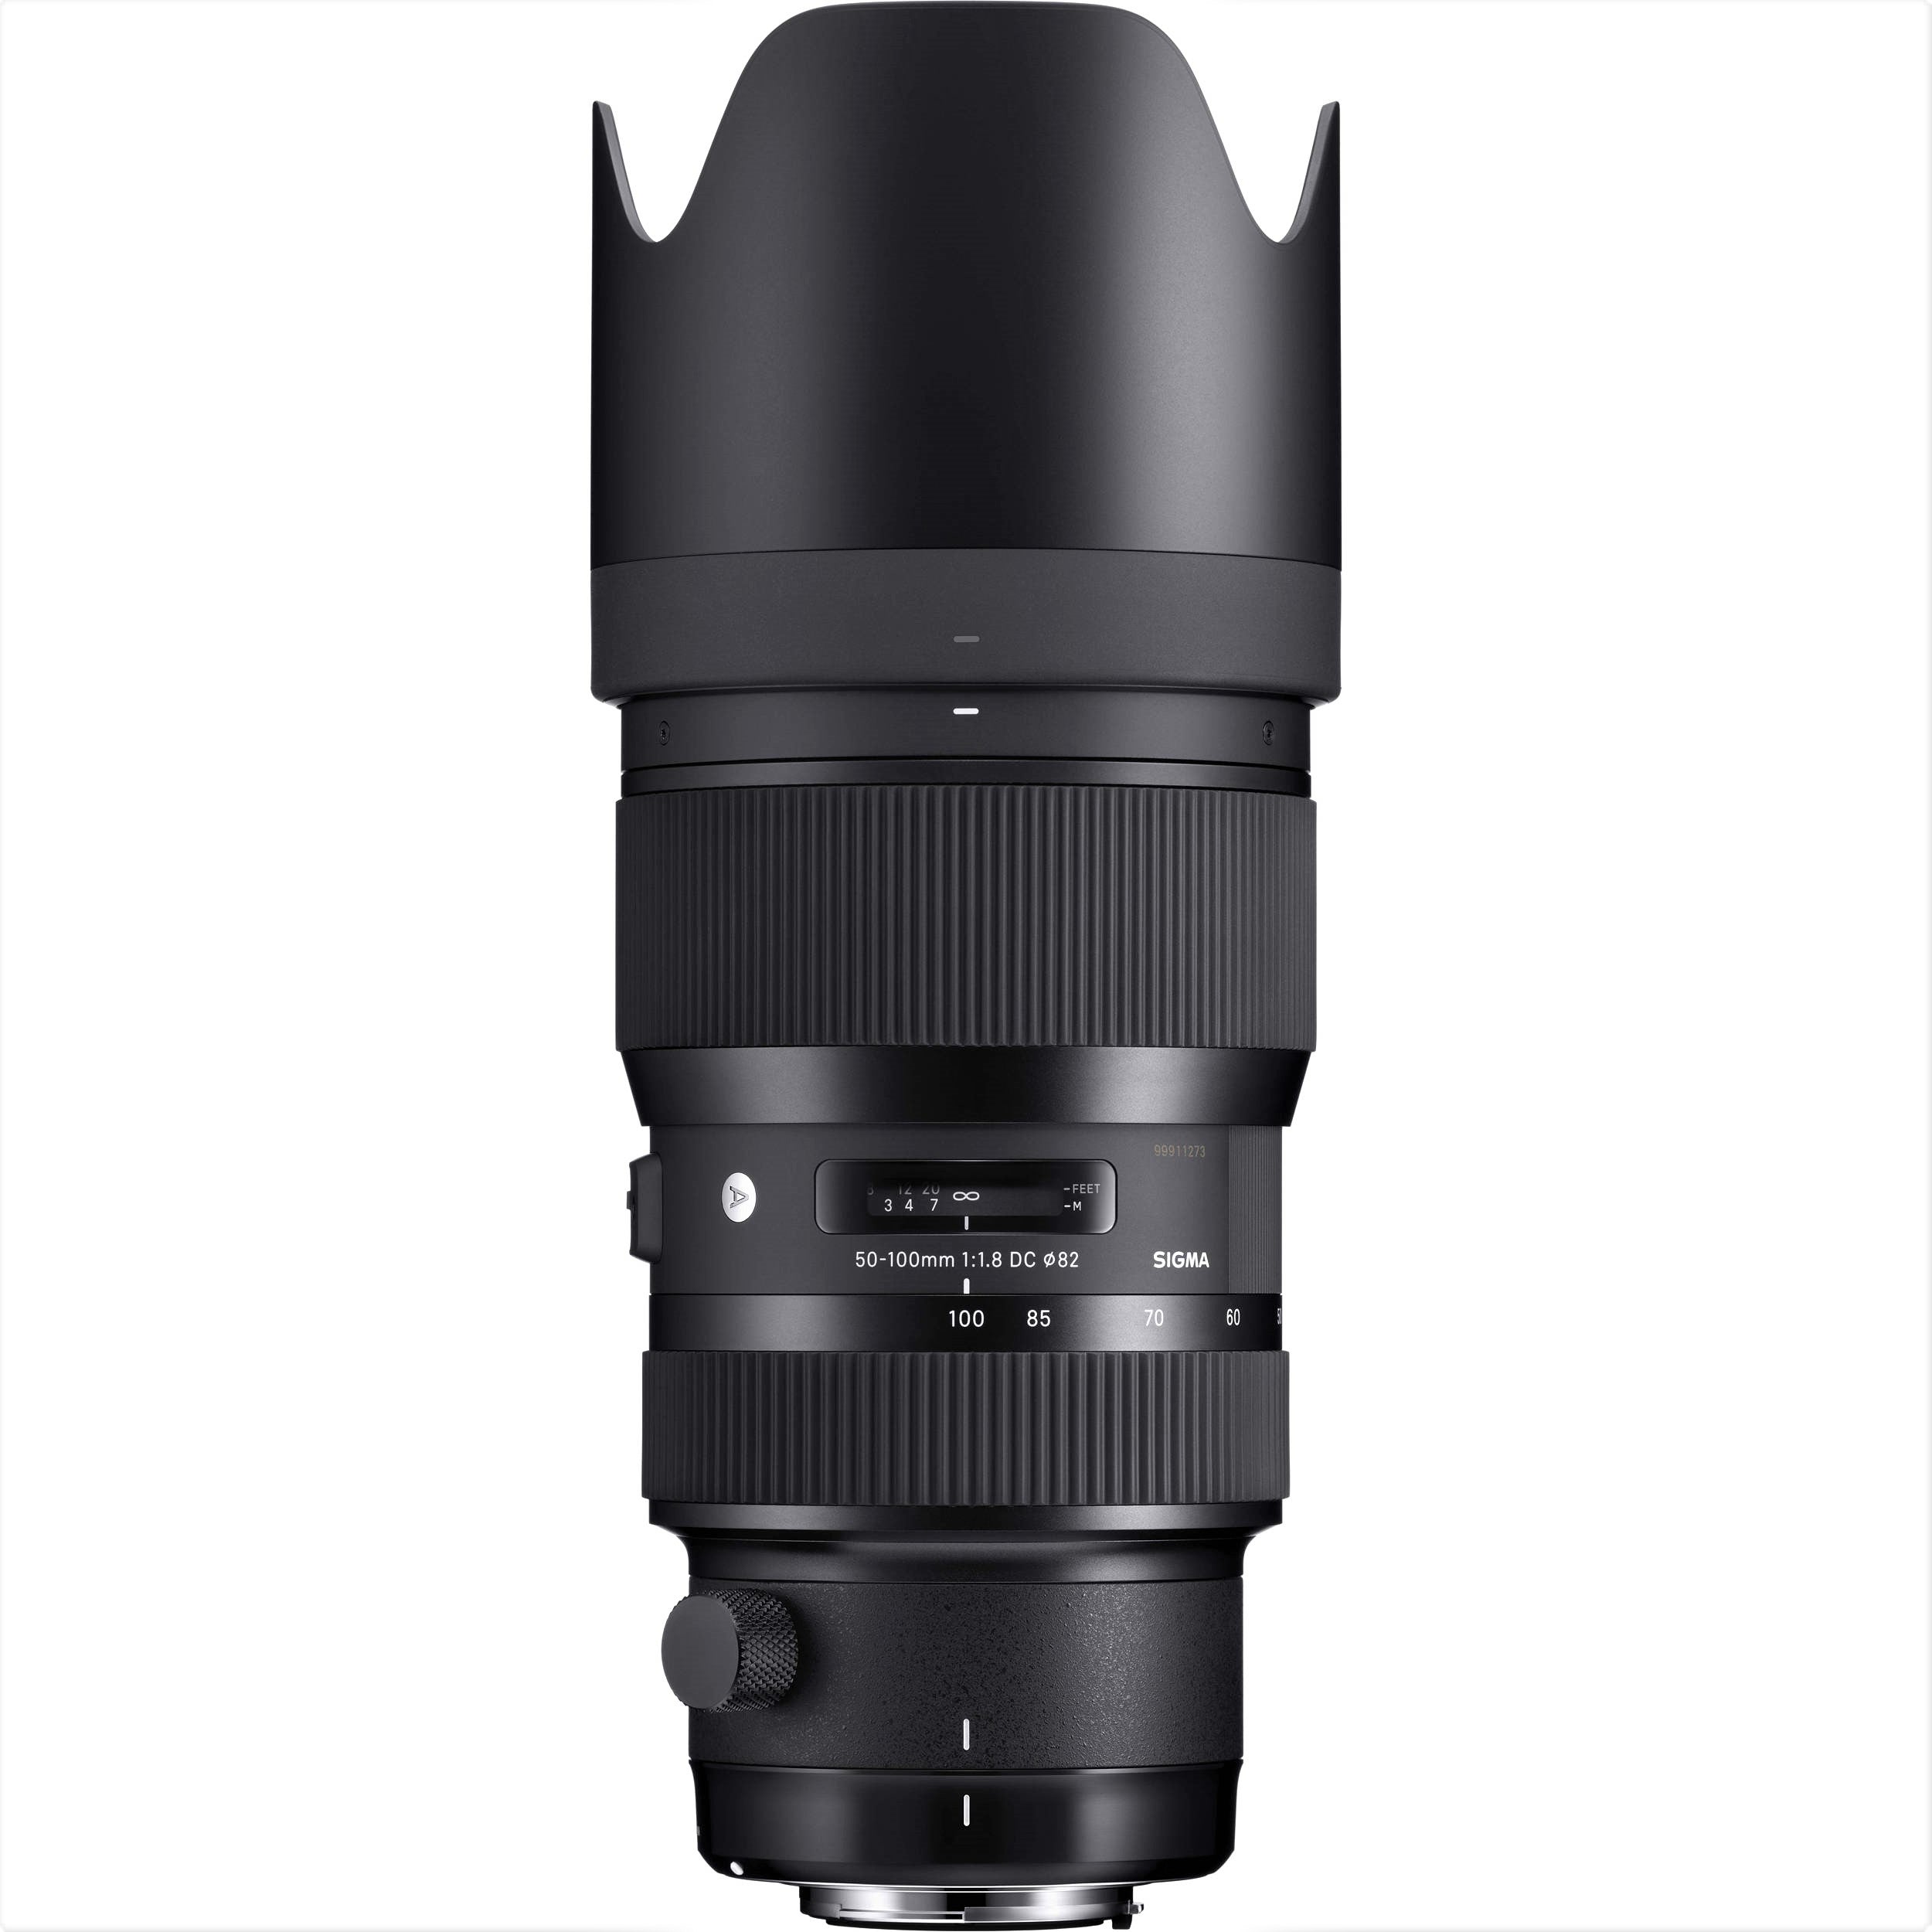 Sigma 50-100mm F1.8 DC HSM Art Lens for Canon EF with Attached Lens Hood on the Top